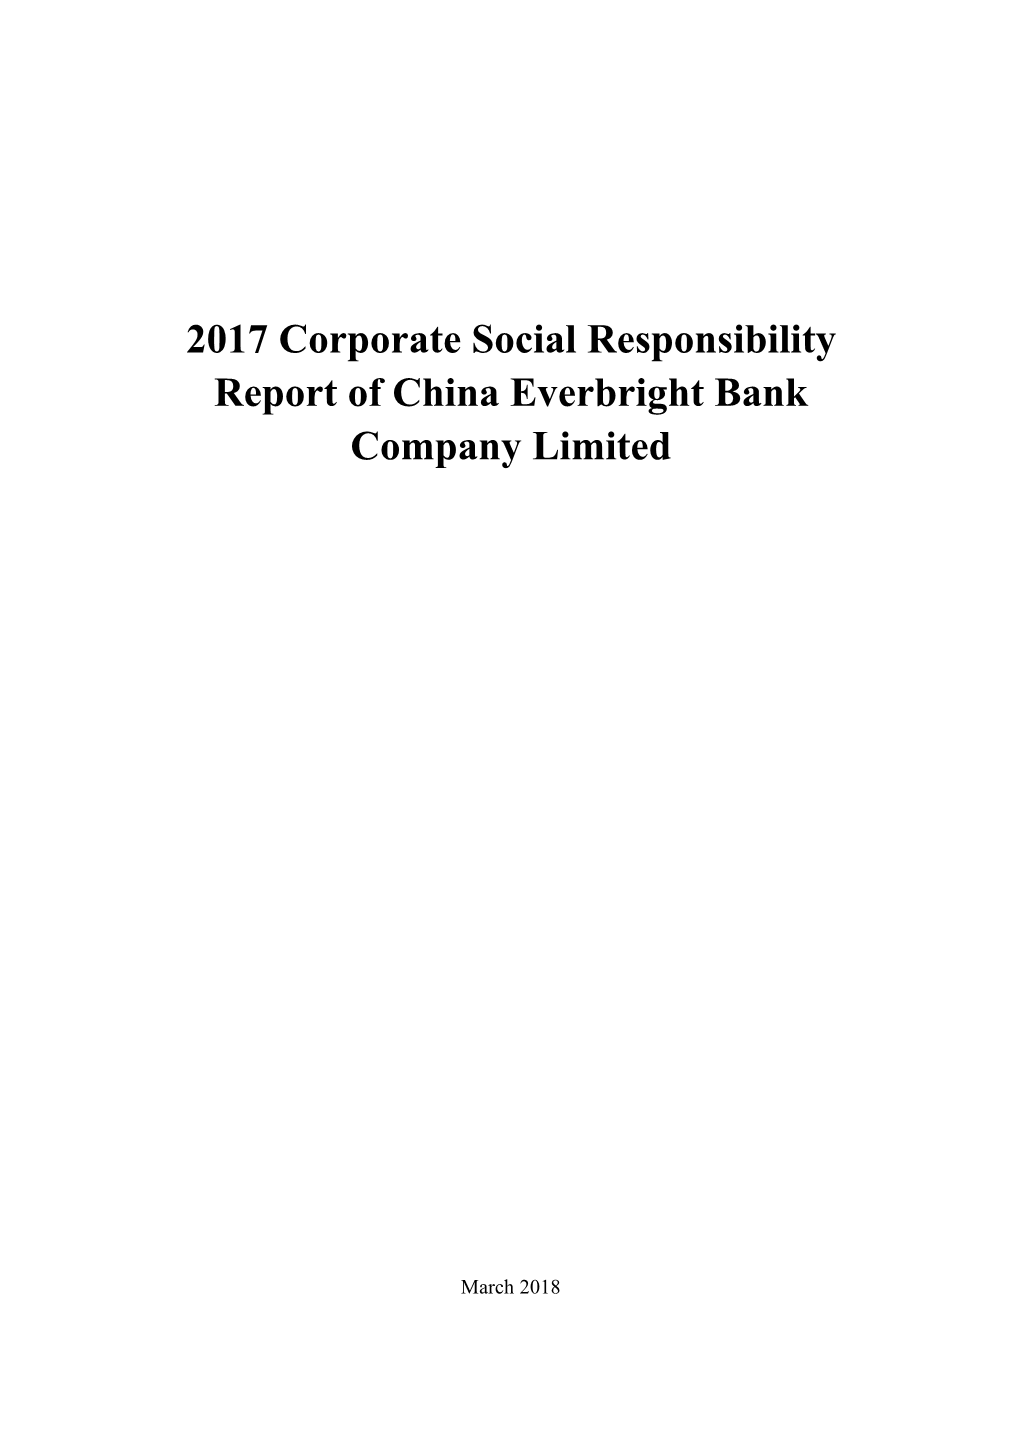 2017 Corporate Social Responsibility Report of China Everbright Bank Company Limited